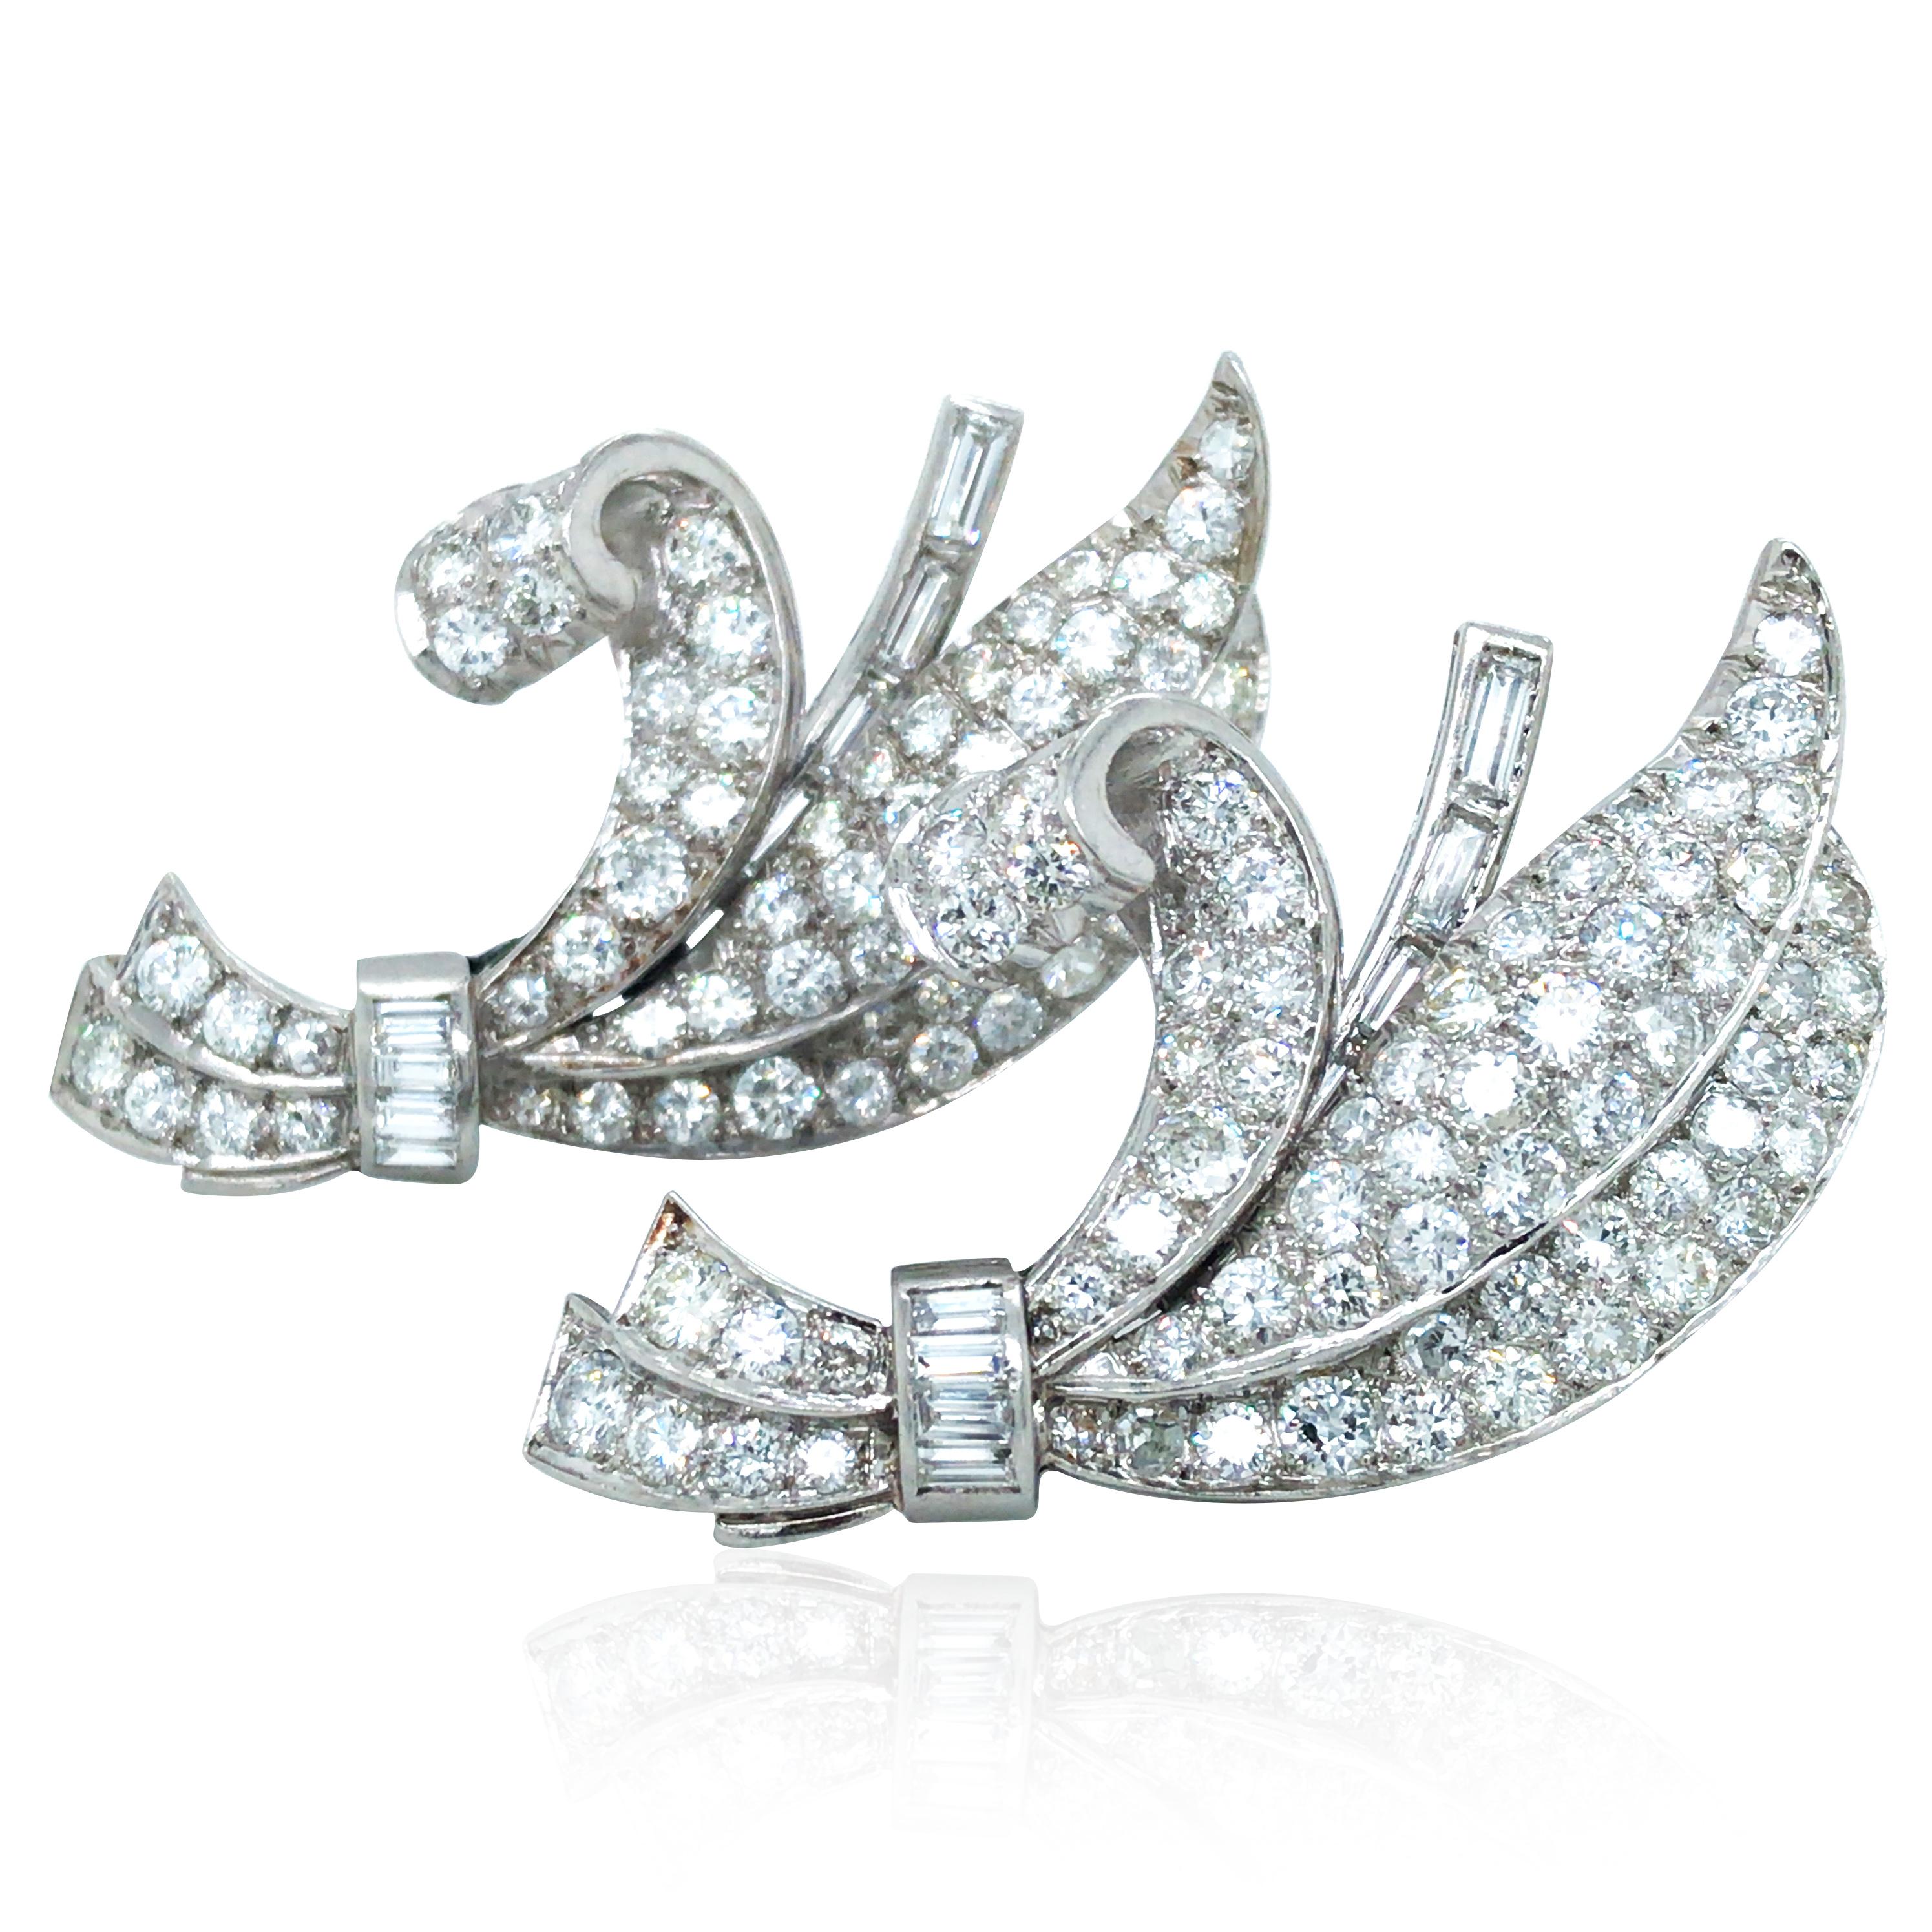 These diamond double pin brooches are crafted in platinum. They consist of 16 baguette-cut and 130 round-cut diamonds approx. 8ct in total.

Diamond: 8ct
Weight: 27.1grams
Measurement: 4.7x2.8cm